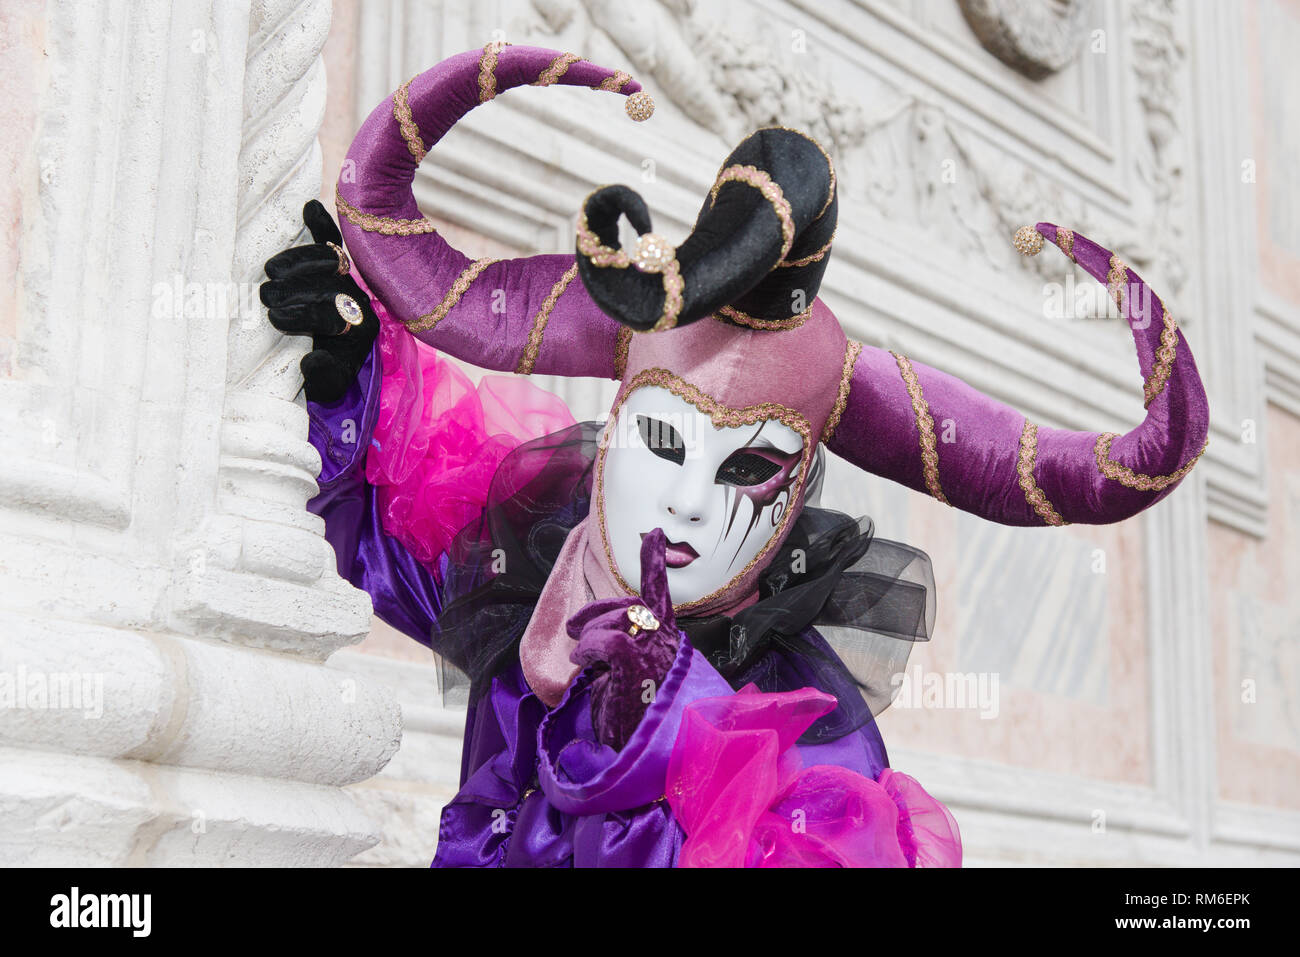 A poser in Venice during Venice Carnival. He is wearing a decorated mask and a purple outfit complete with horns. The Carnival dates from about 1162. Stock Photo